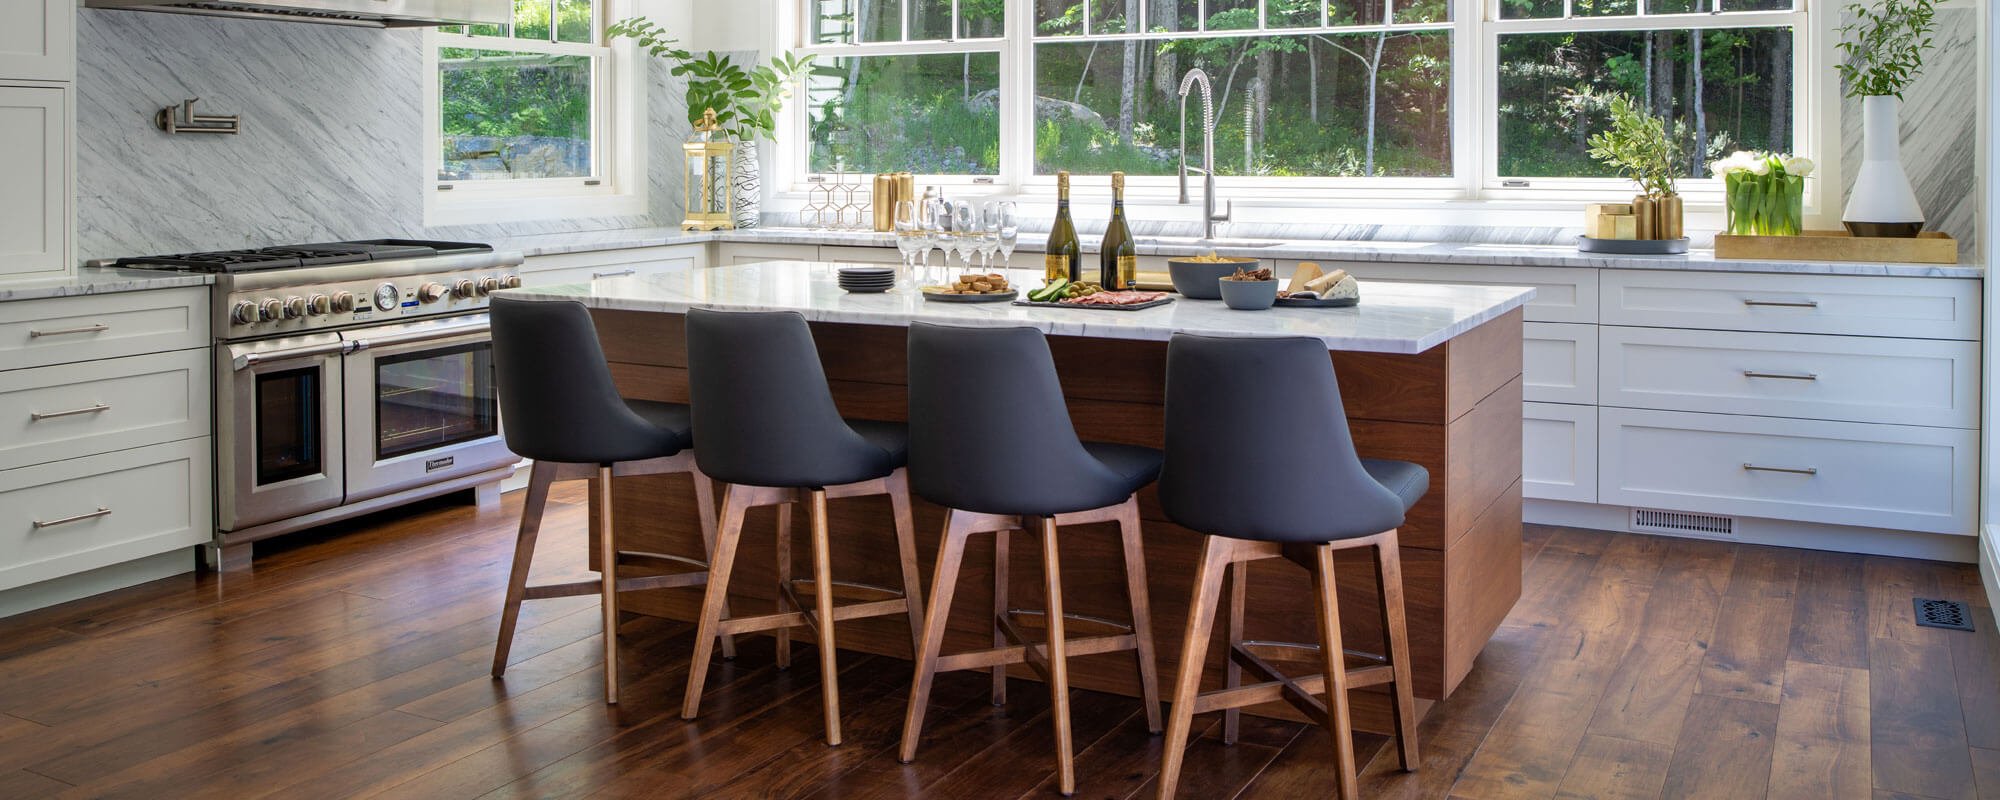 Canadel Barstools Counter Stools West Palm Beach